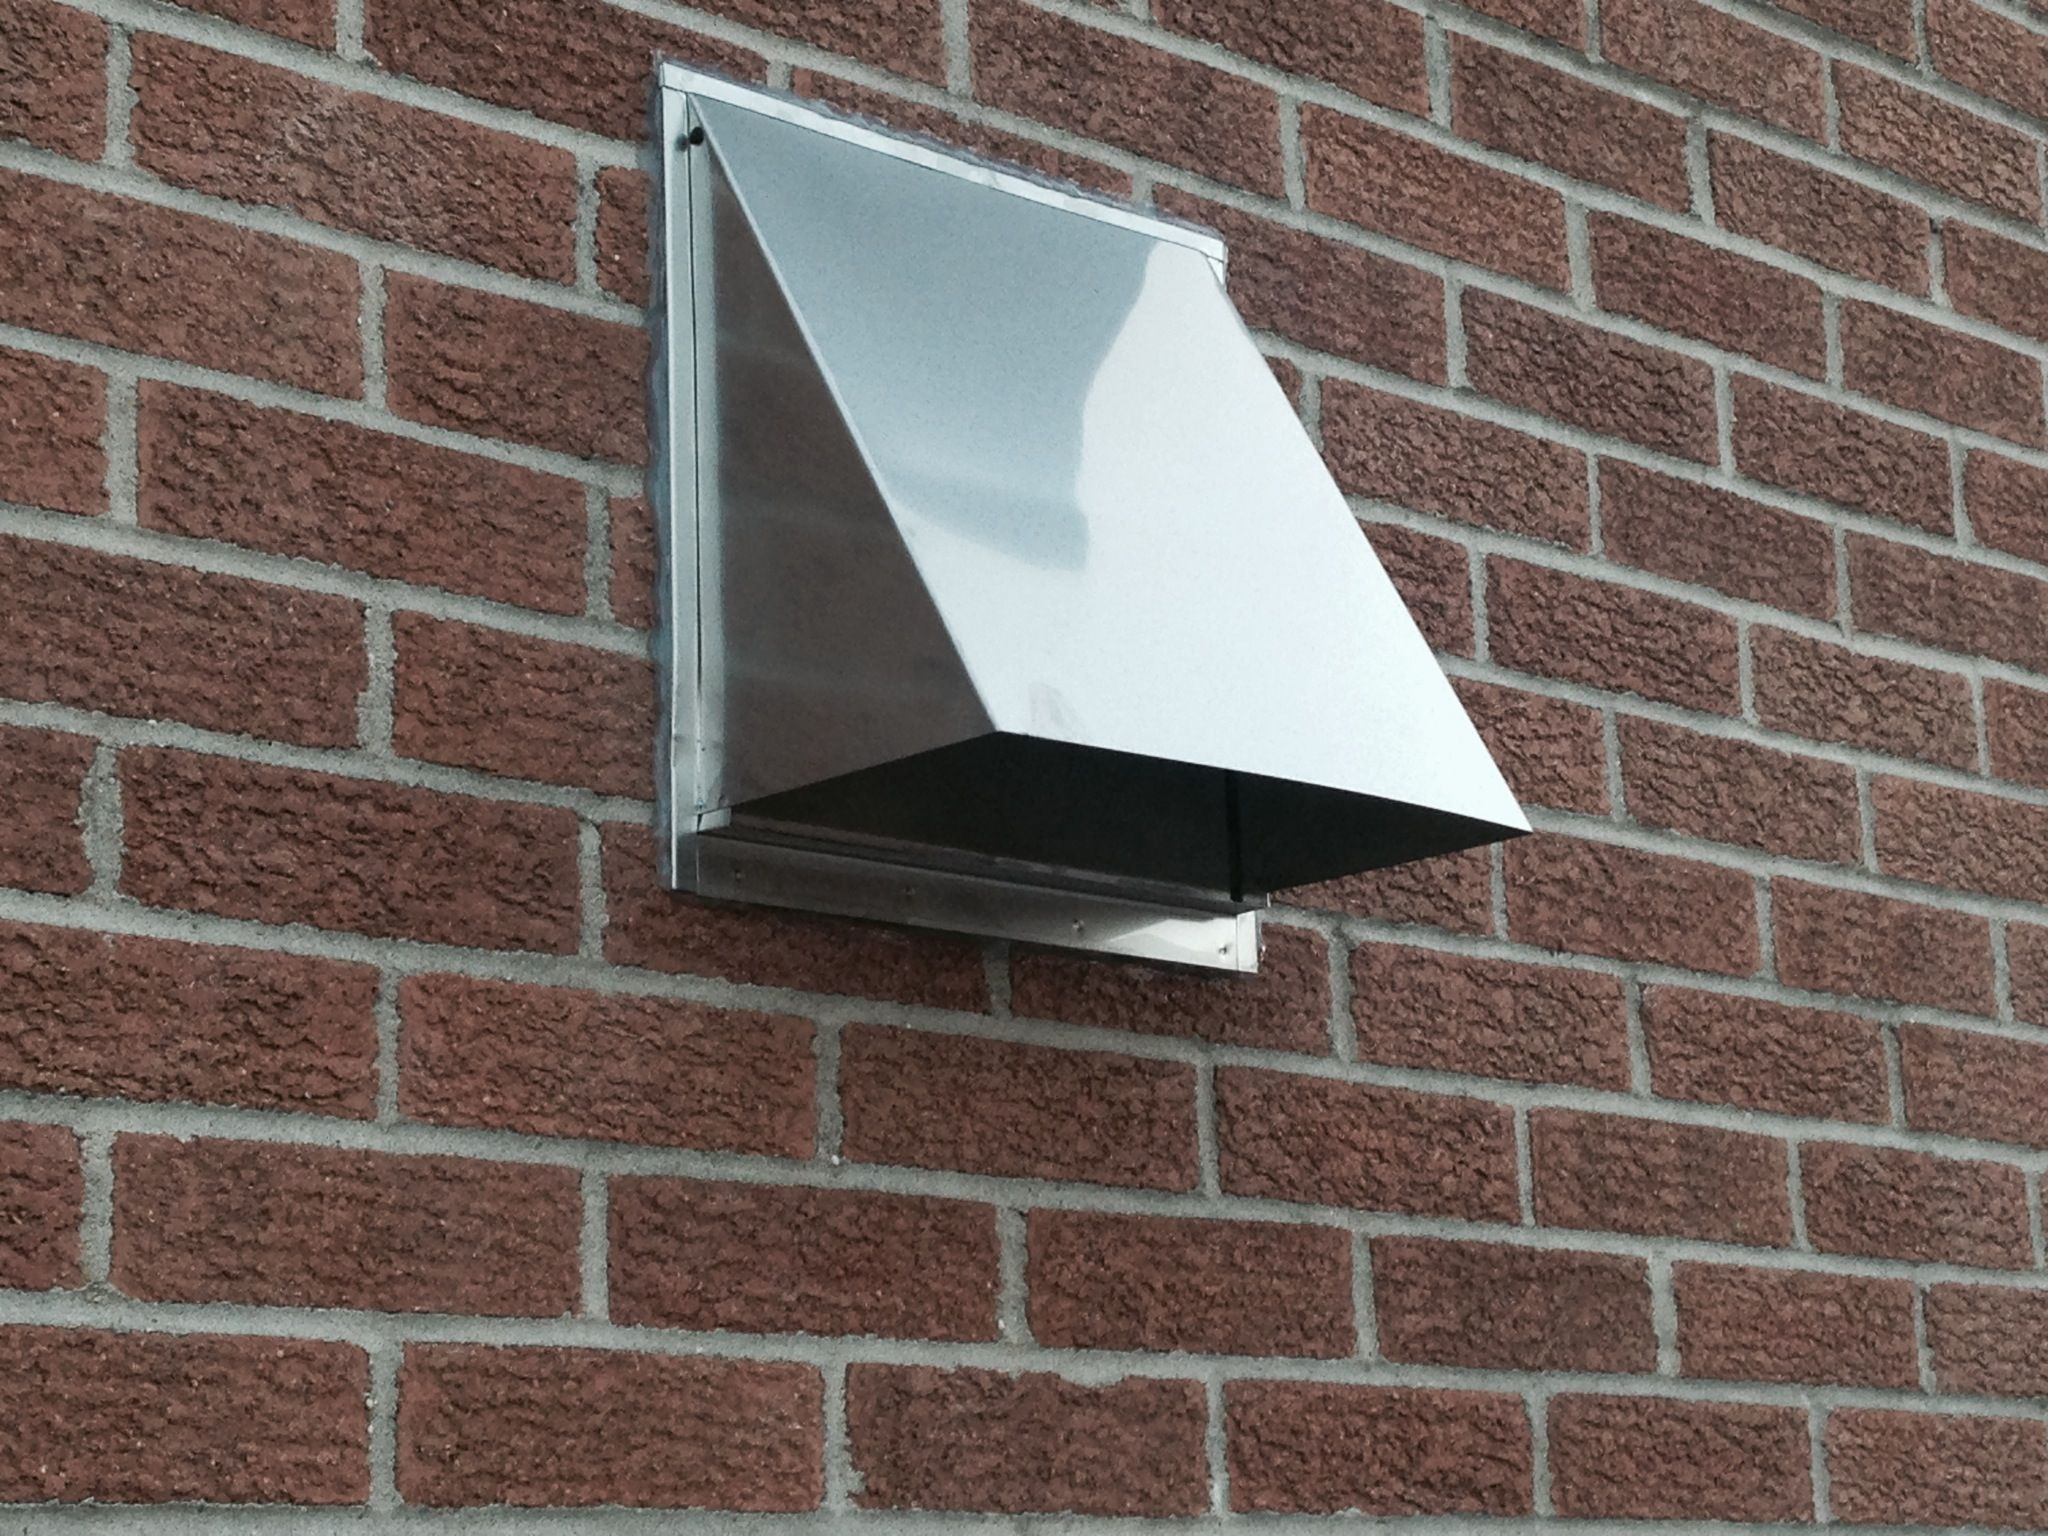 Kitchen Exhaust Vent Wall Cap
 Exterior Wall Vent Covers